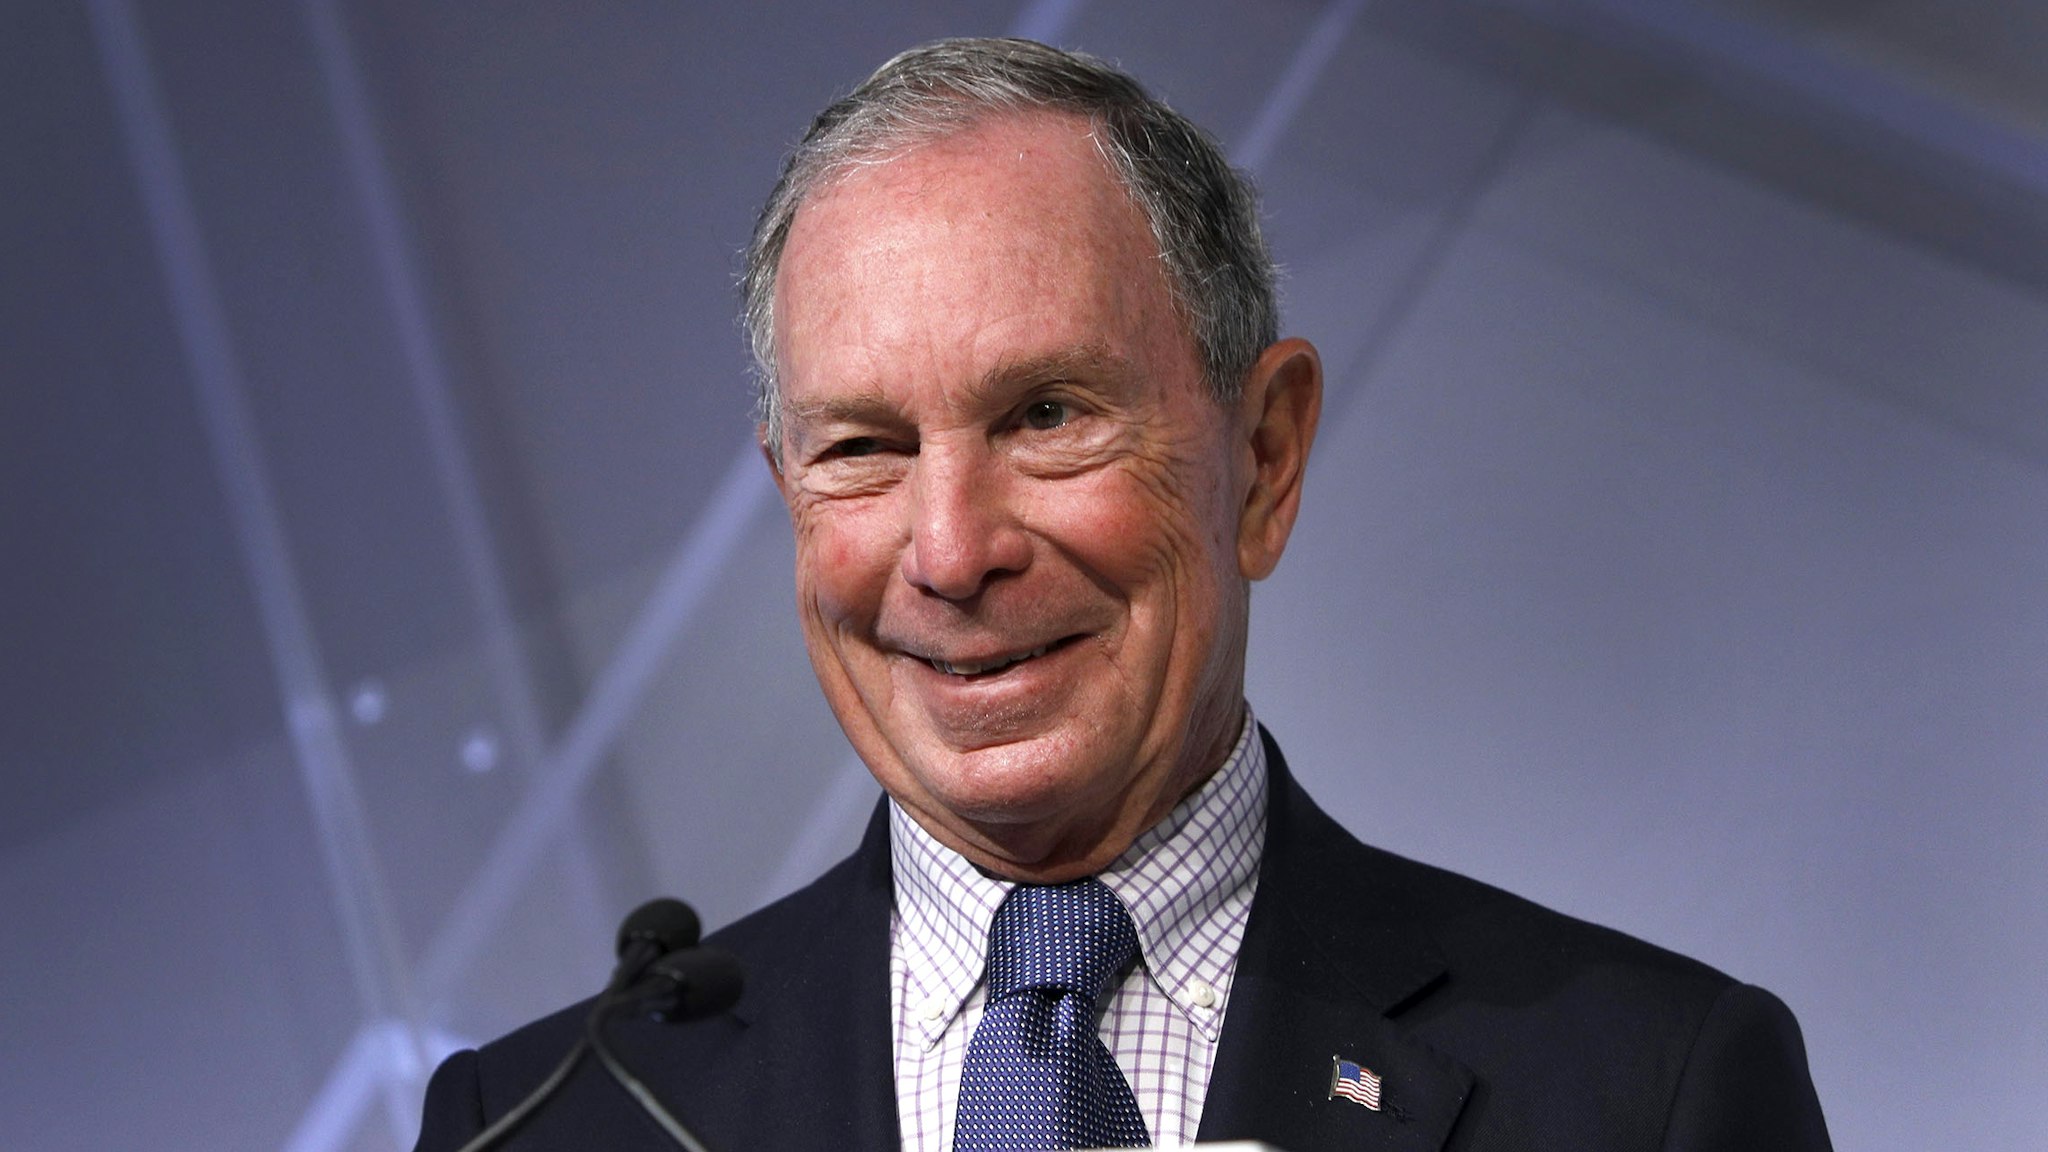 DETROIT, MI - OCTOBER 29: Michael Bloomberg, billionaire and former Mayor of New York City, speaks at CityLab Detroit, a global city summit, on October 29, 2018 in Detroit, Michigan. Bloomberg is considered to be a potential Democratic presidential candidate for the 2020 election.